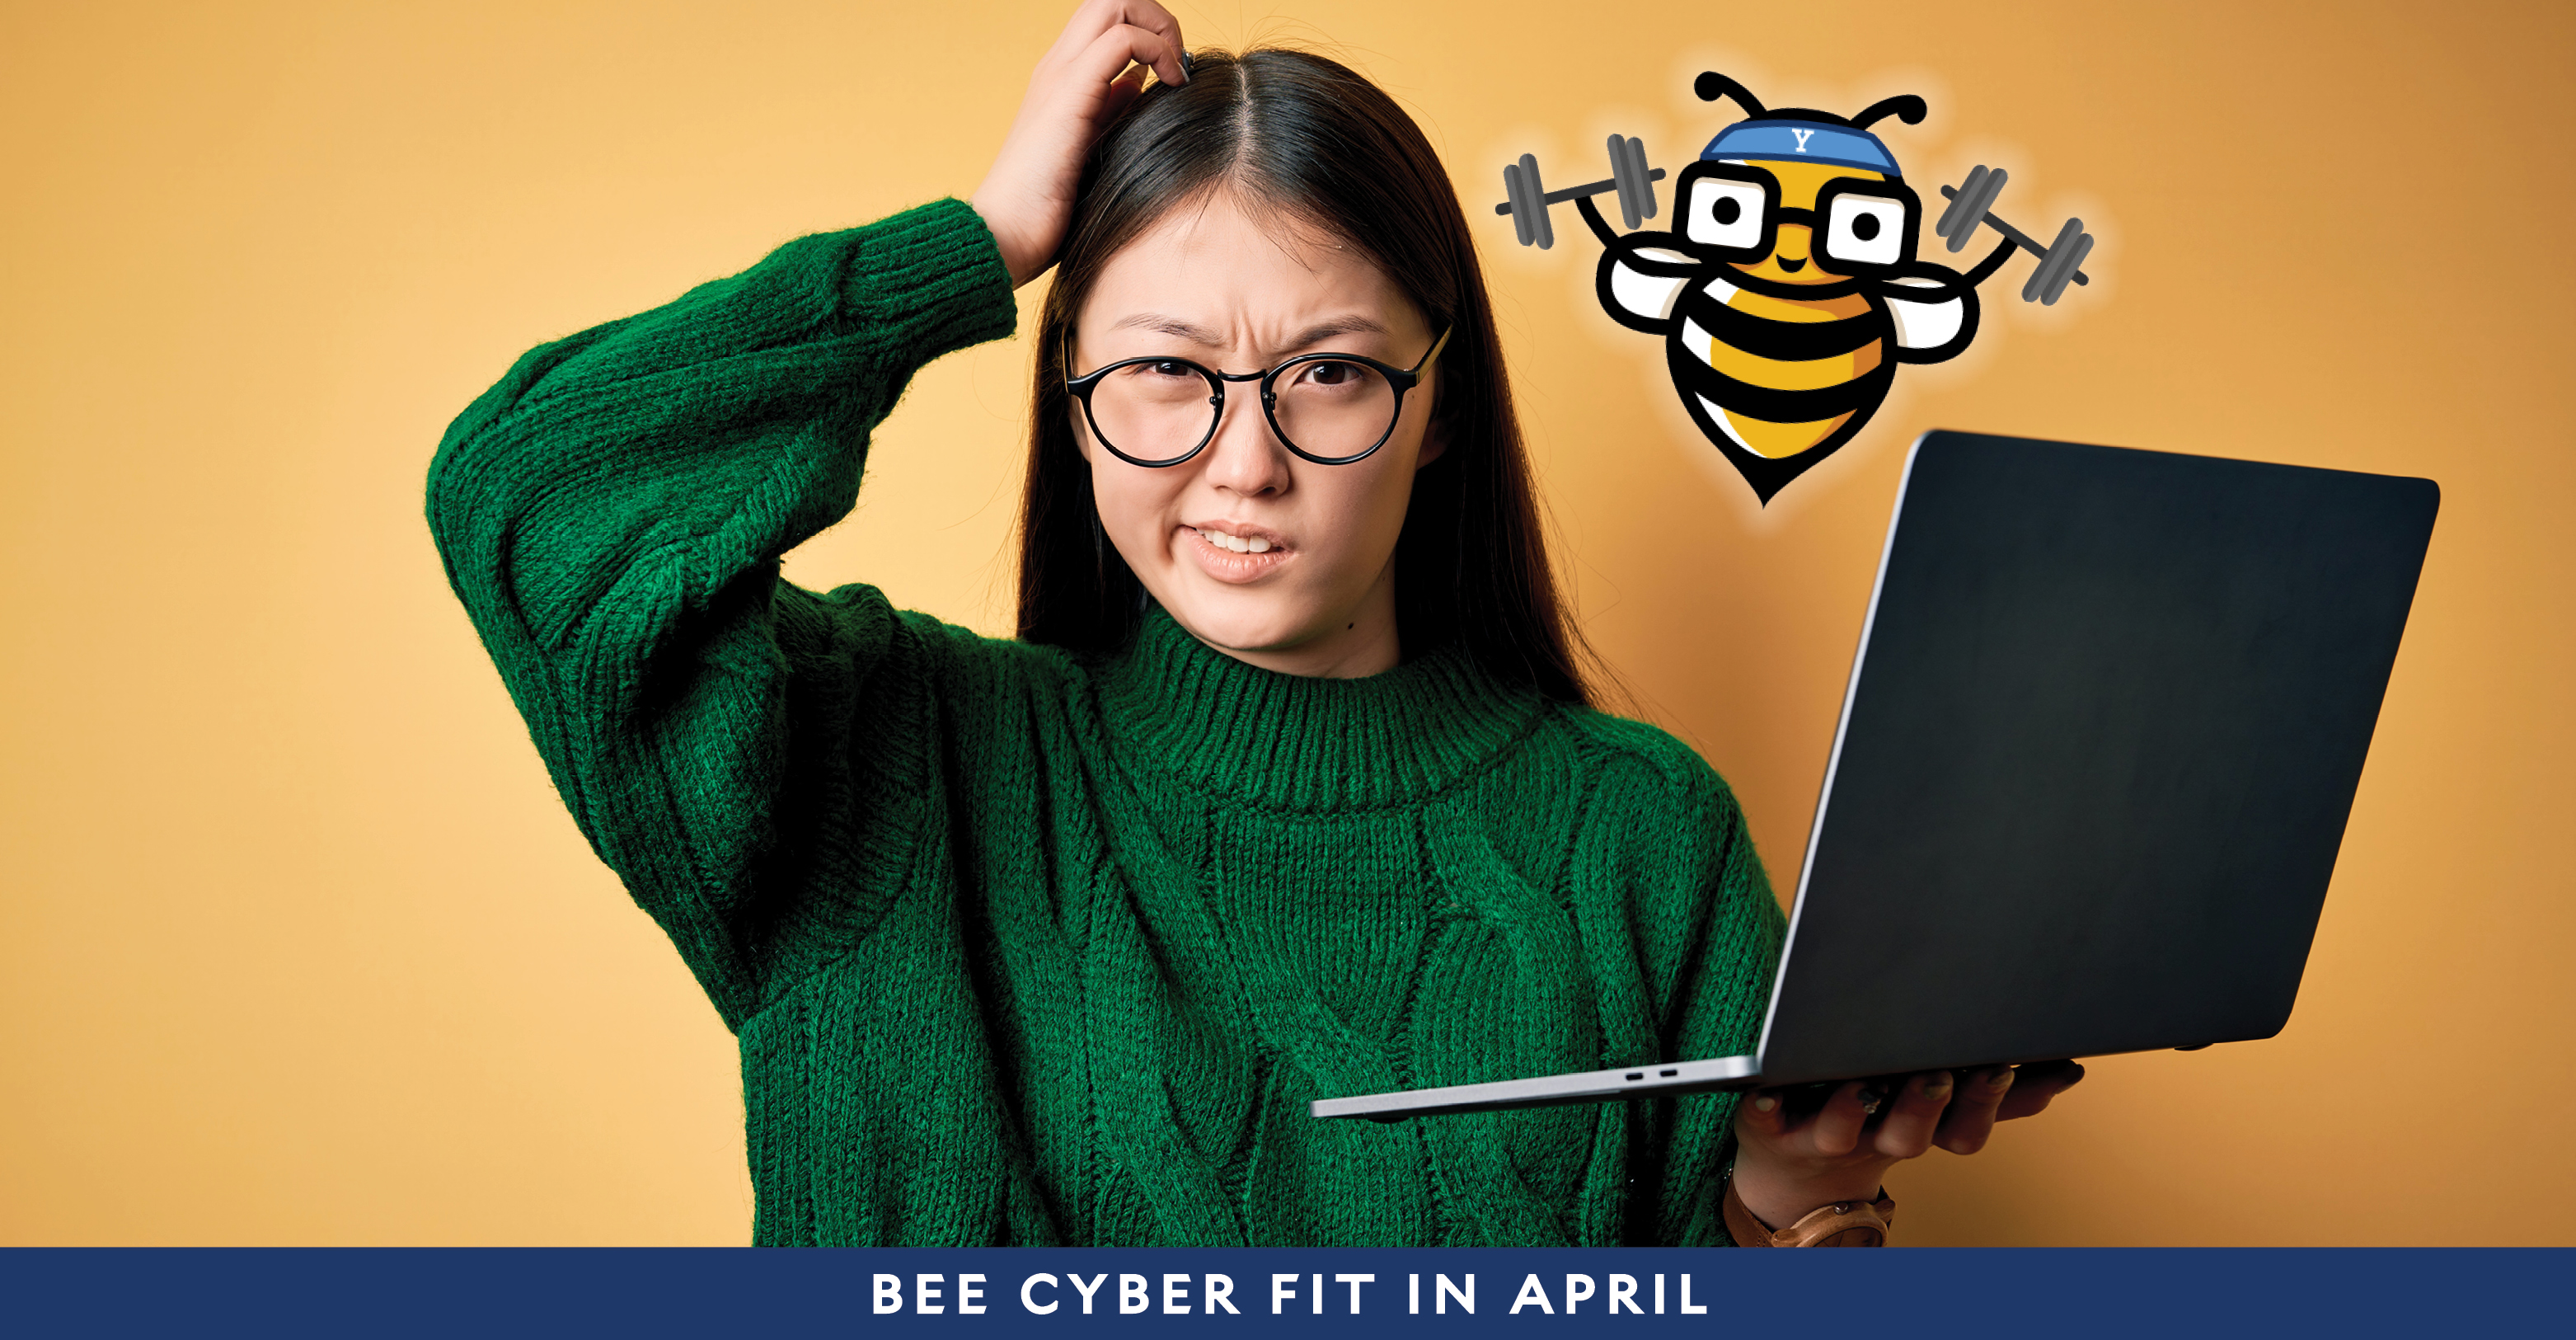 Bee Cyber FIt in April: Woman with laptop looking thoughtful